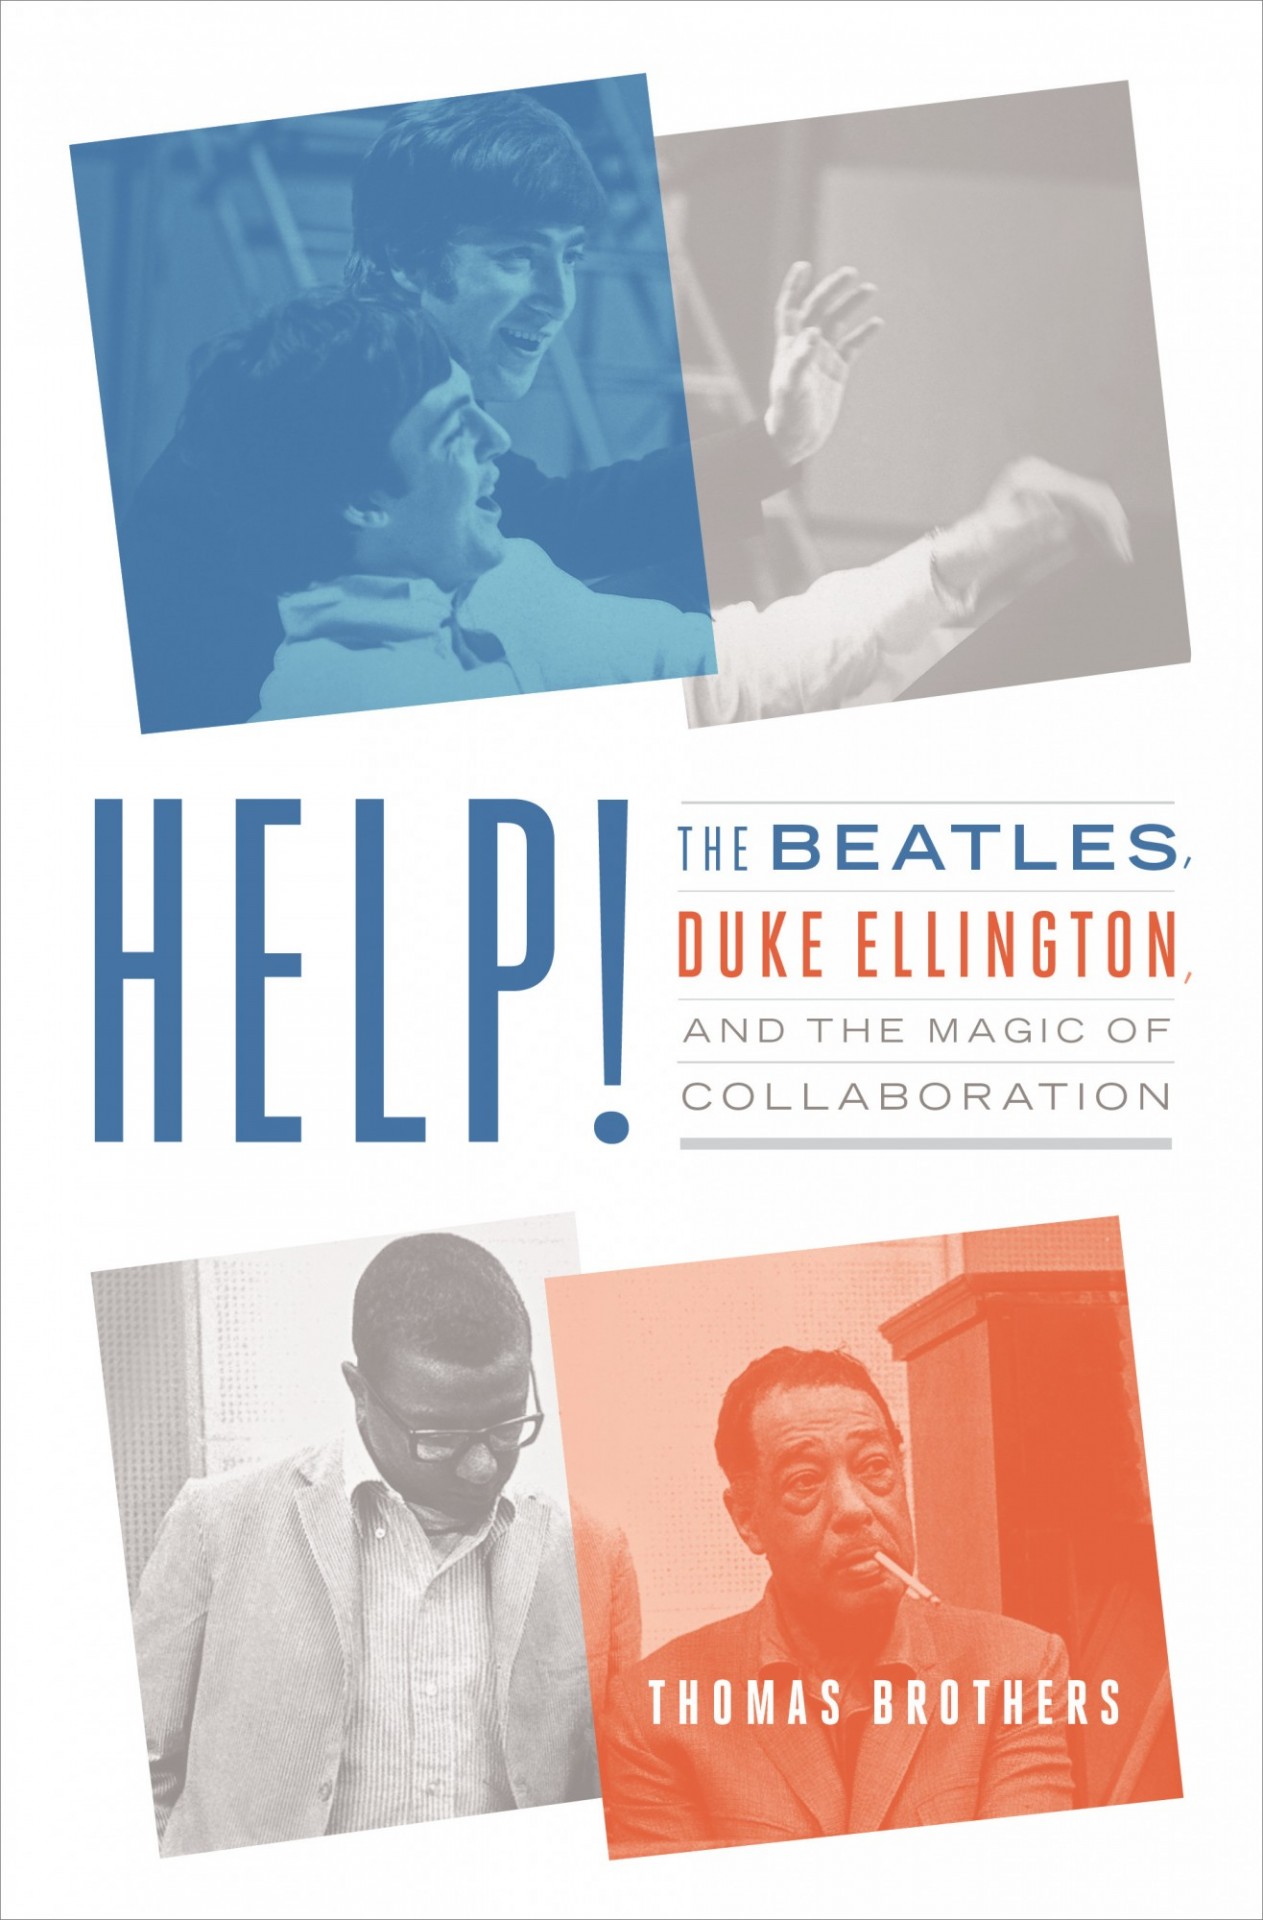 Picture of Thomas Brothers, "The Beatles, Duke Ellington, and the Magic of Collaboration" poster